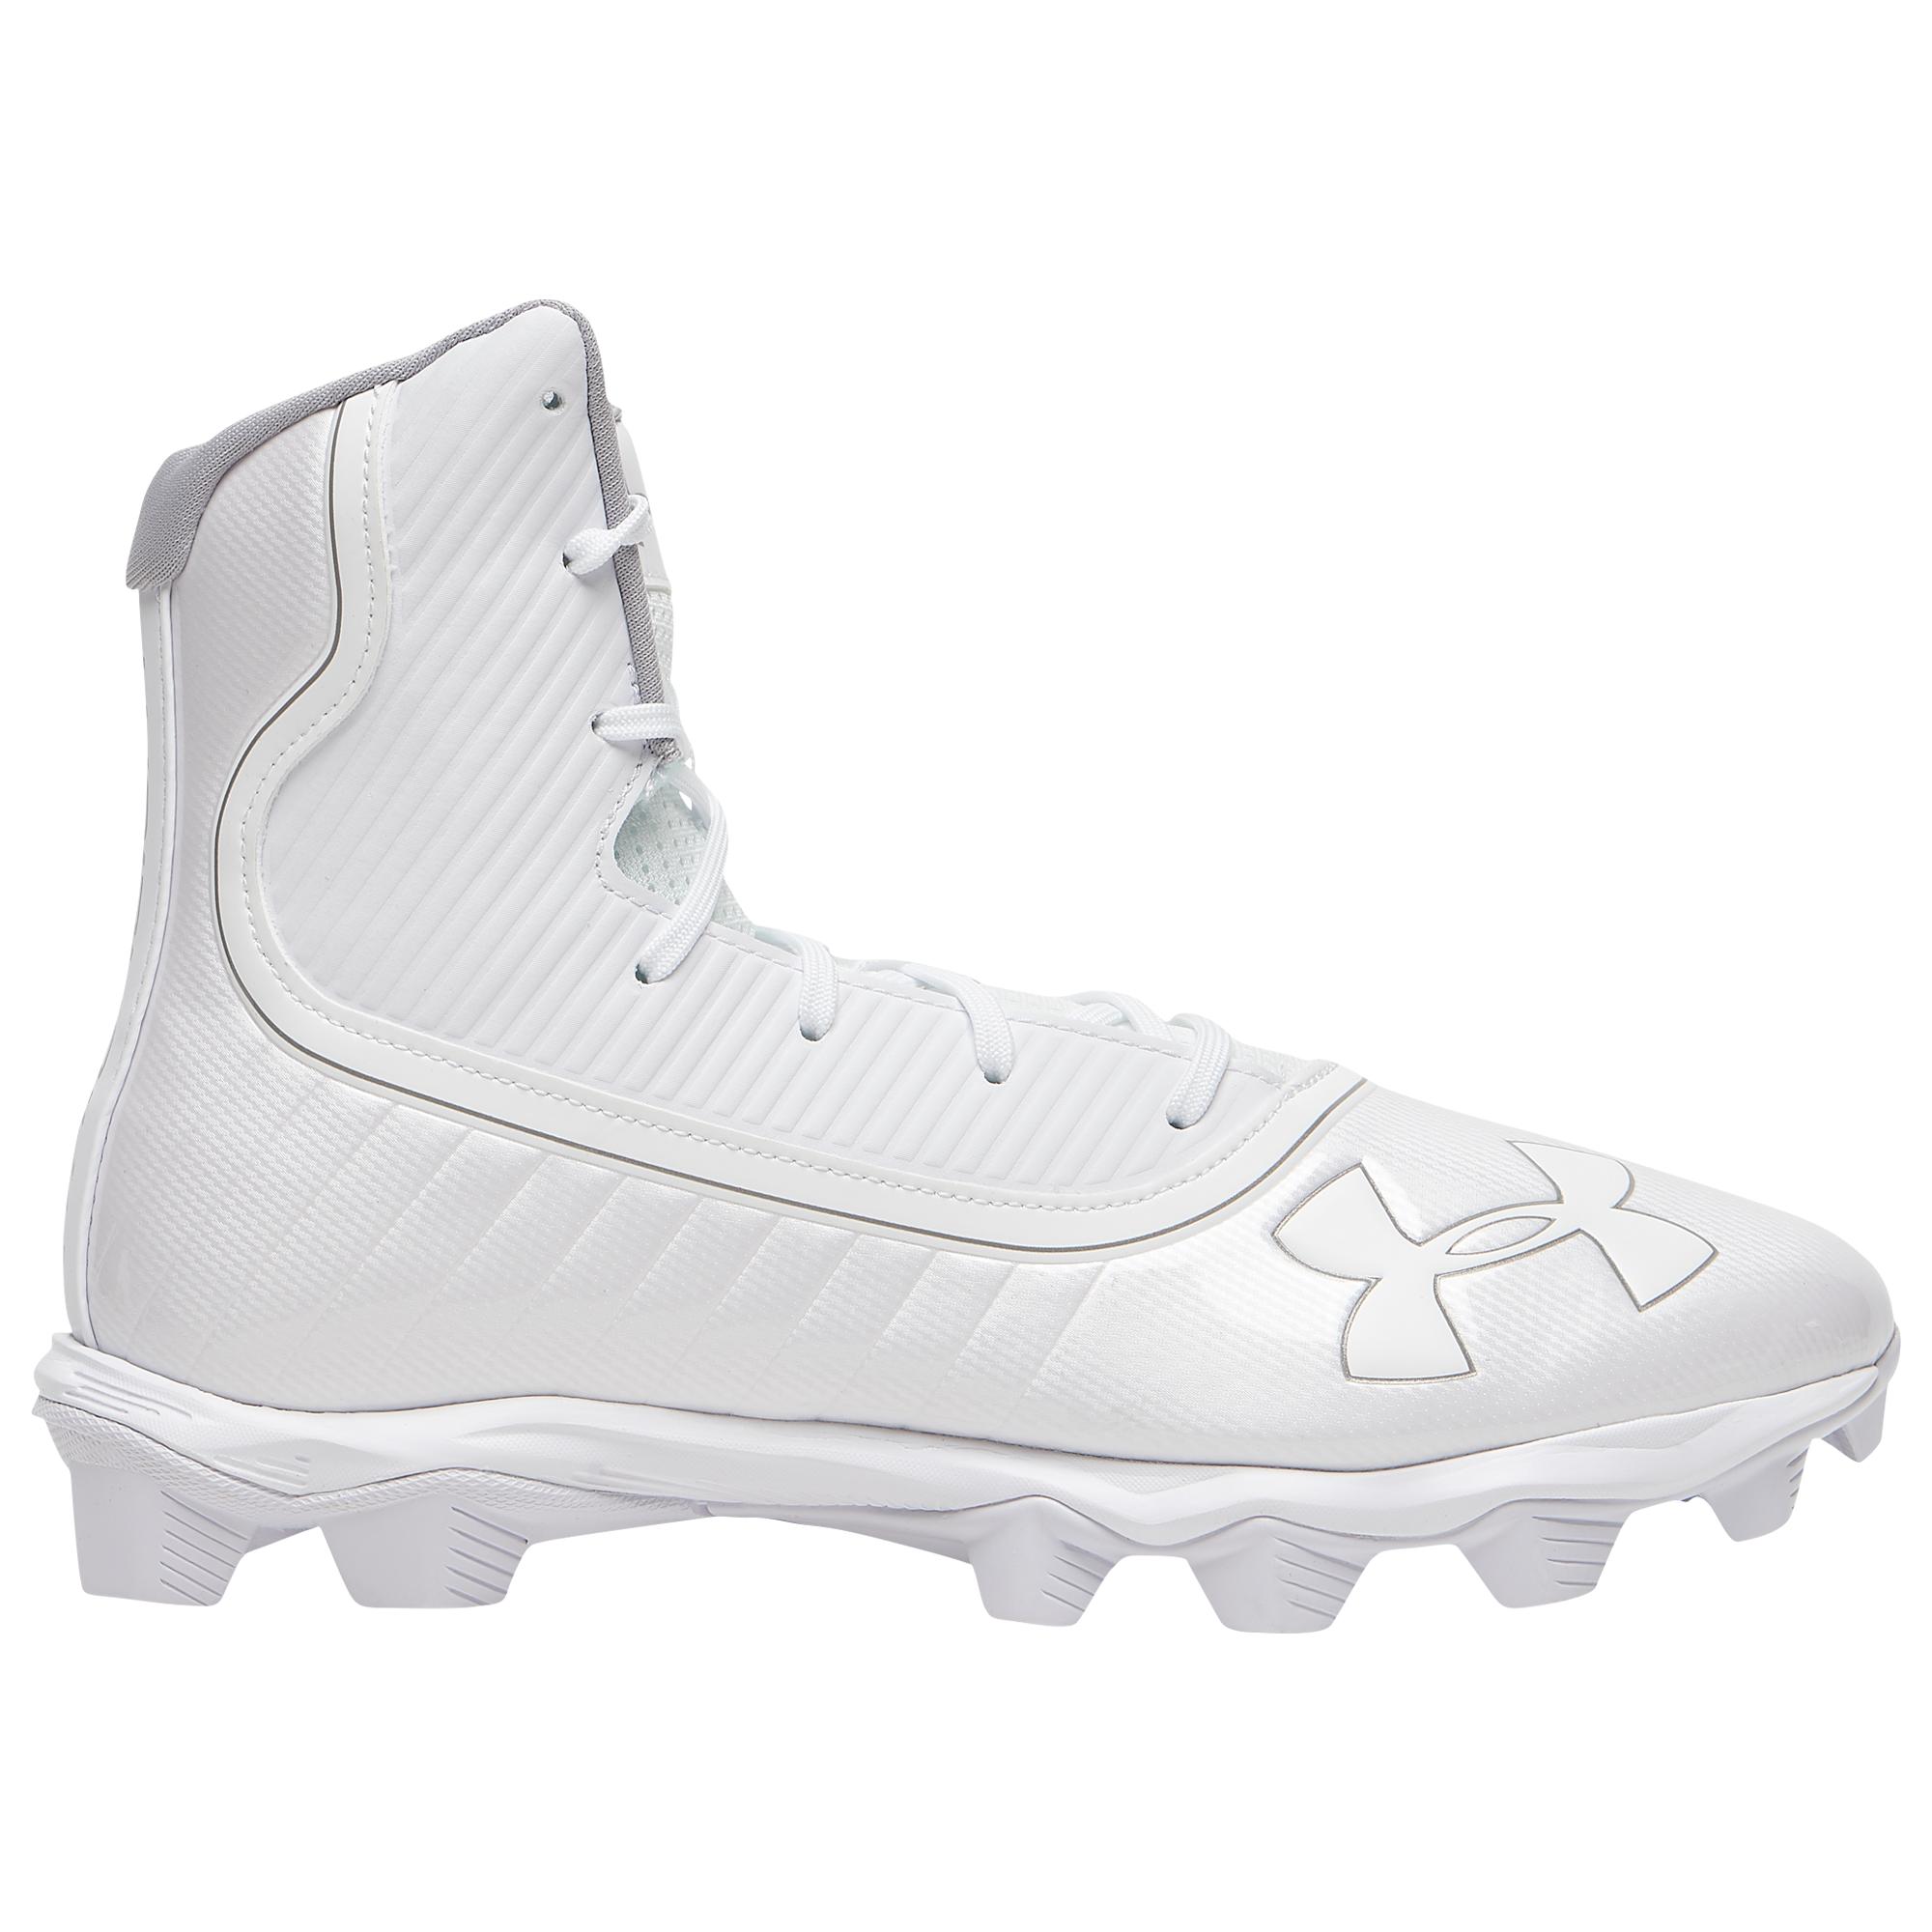 Under Armour Synthetic Highlight Rm Molded Cleats Shoes in White ...